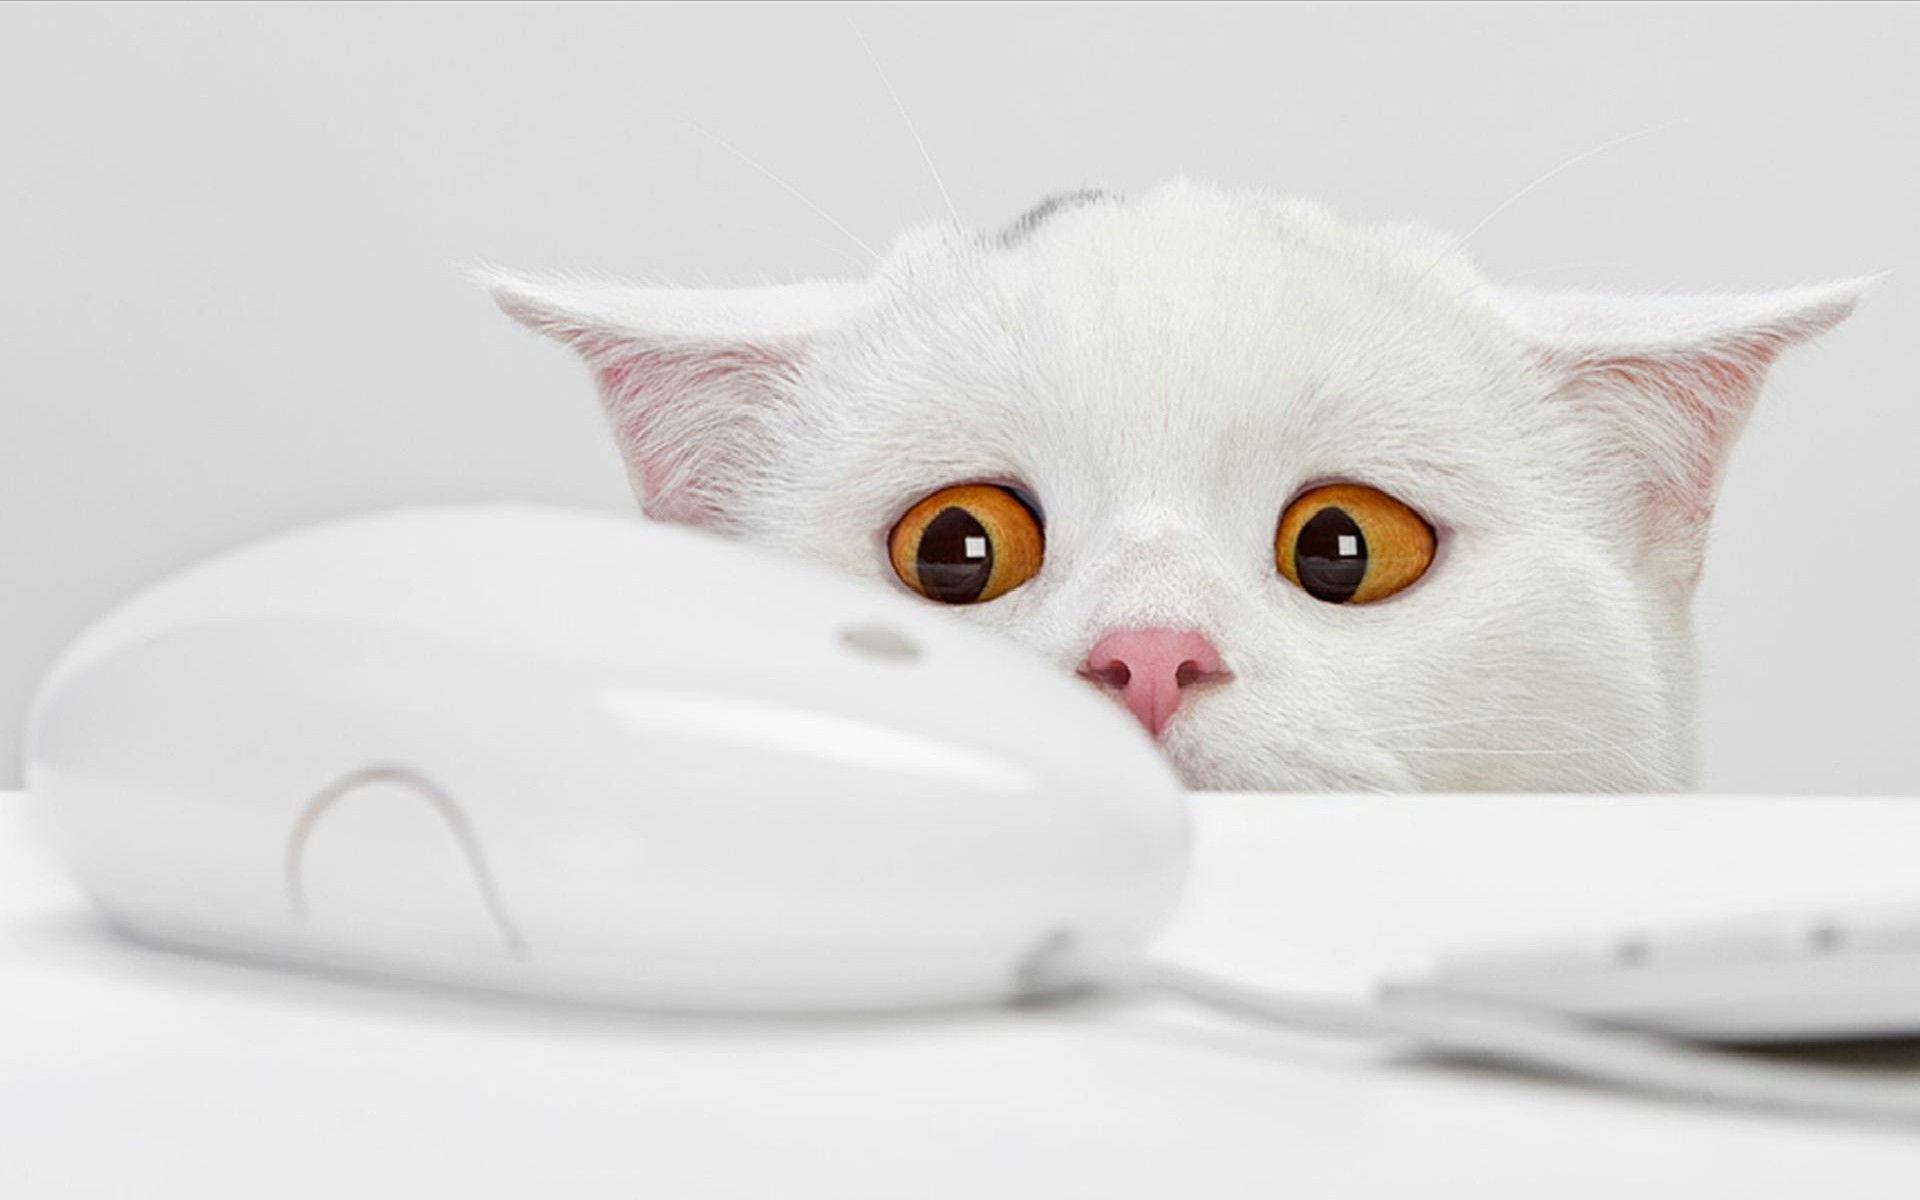 computers, White, Cats, Animals, Keyboards, Funny, Yellow, Eyes, Mice, Simple, Background, White, Background Wallpaper